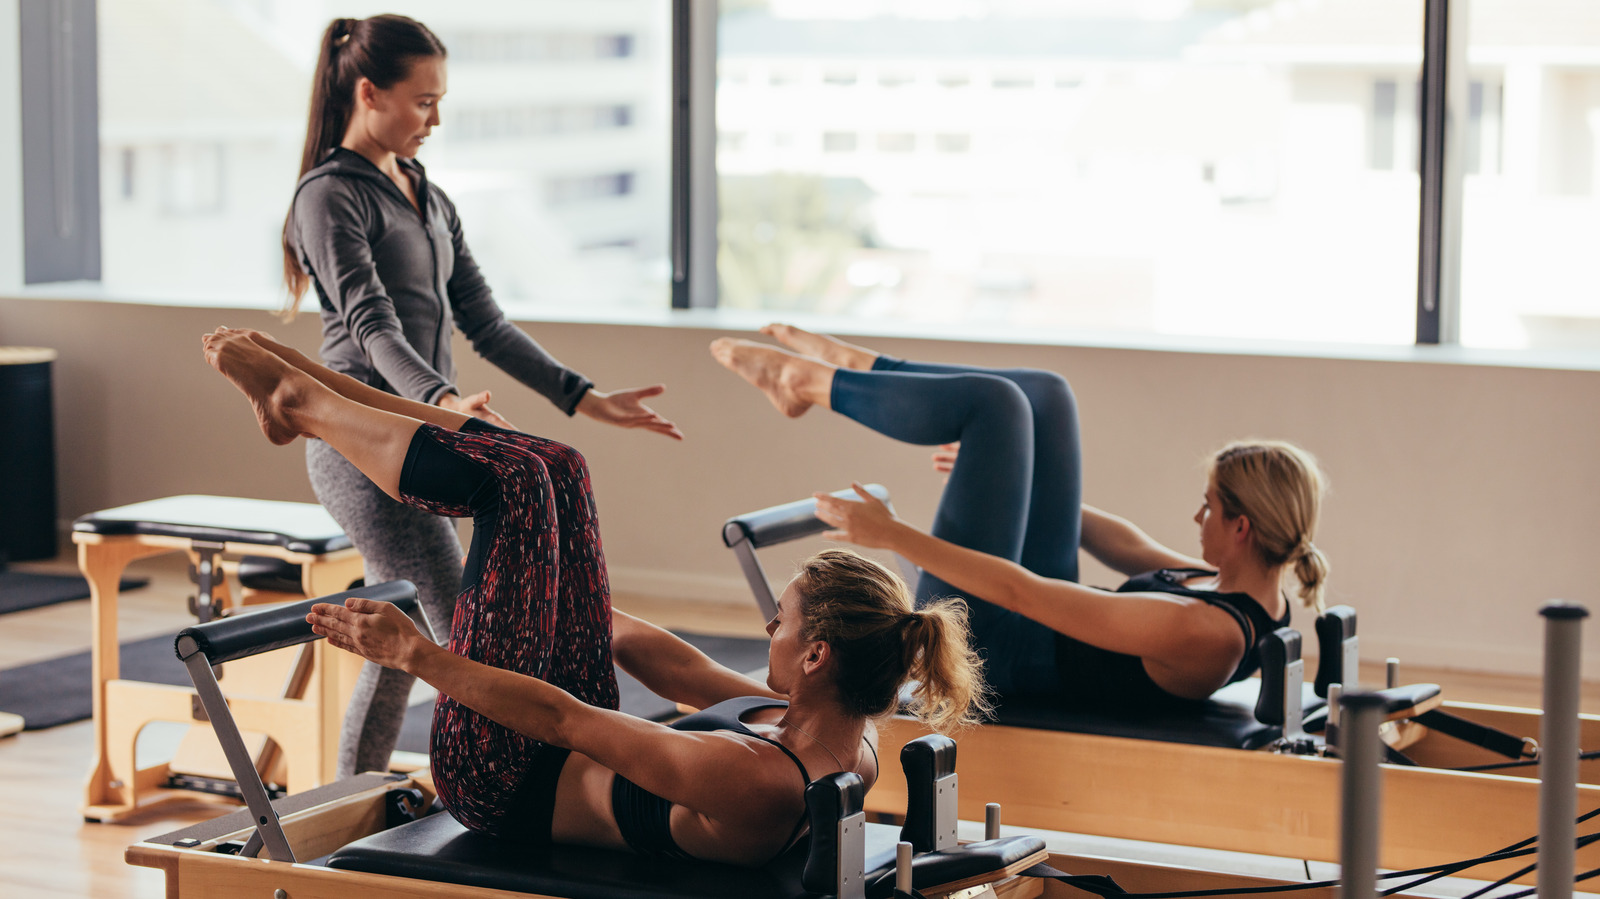 Upgrade your routine, transform your body with Club Pilates